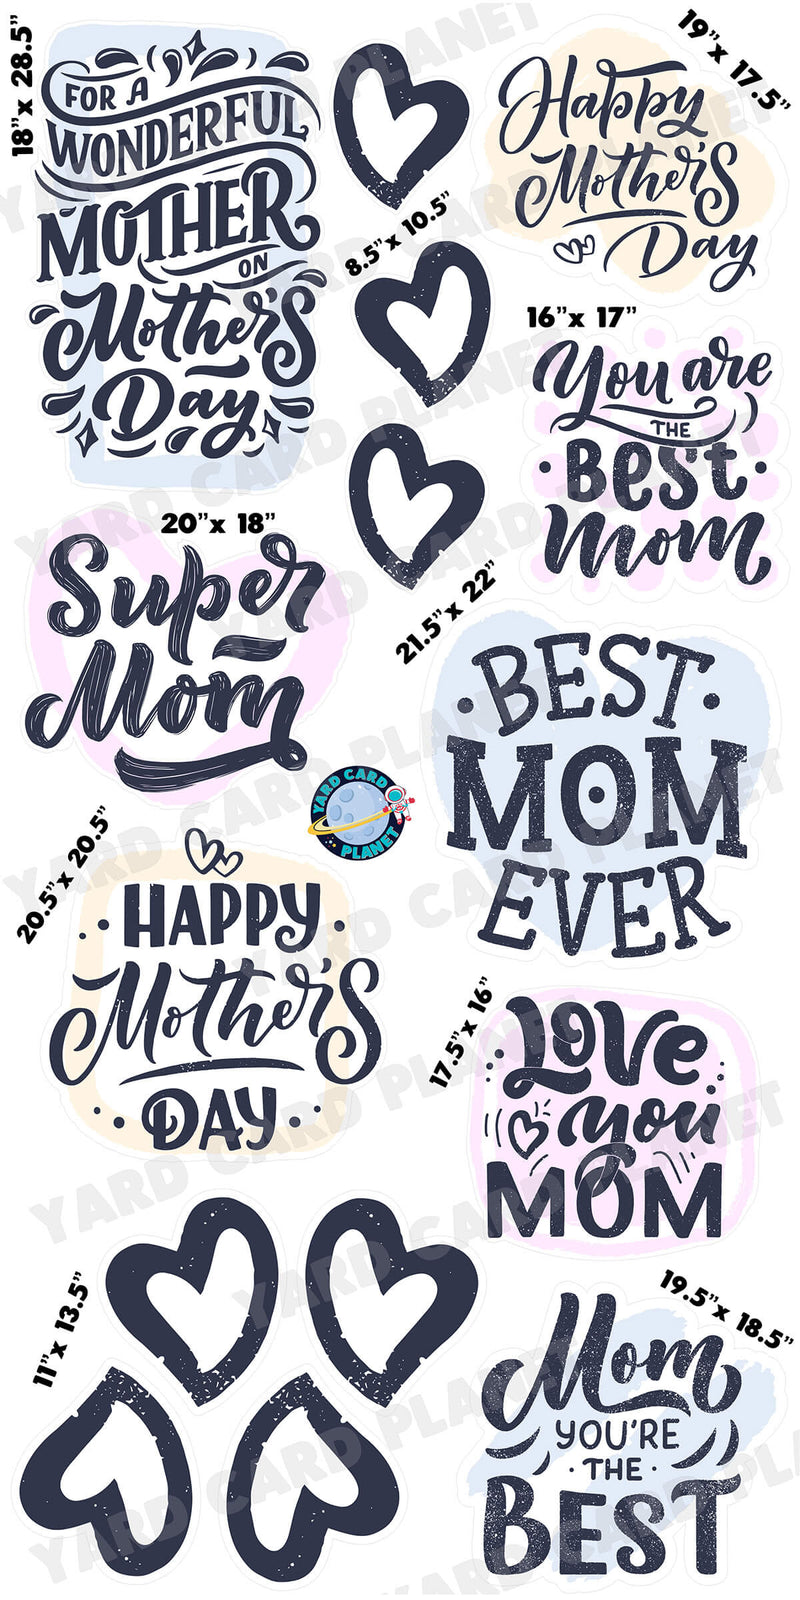 Happy Mother's Day Inspirational Signs and Yard Card Flair Set